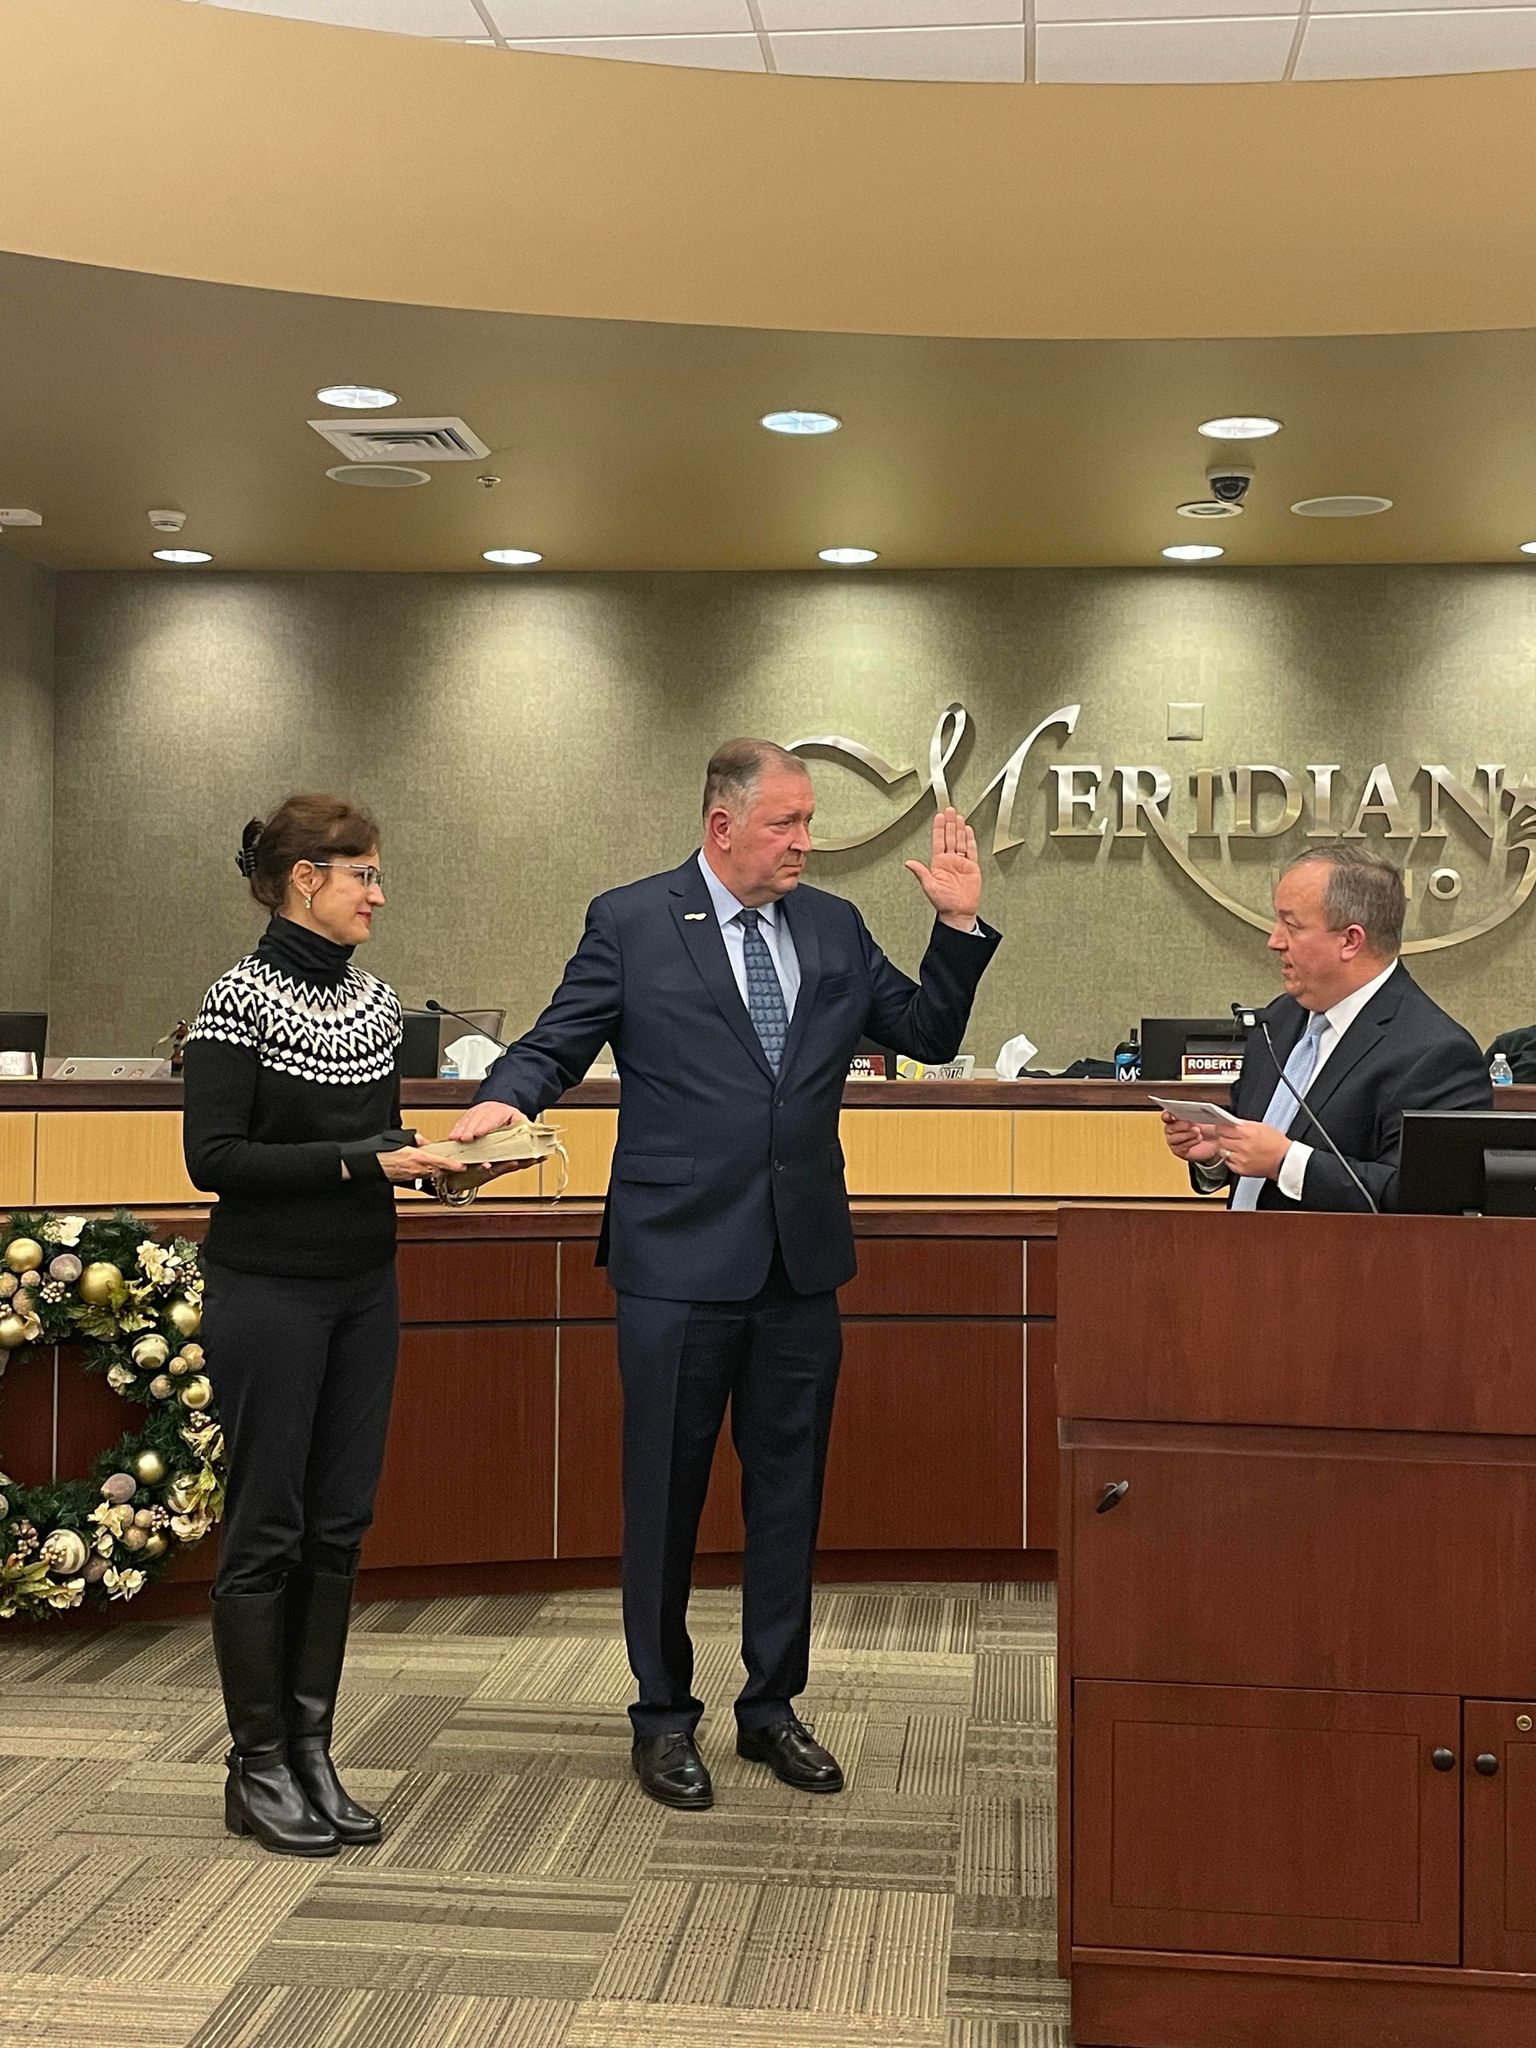 John Overton being sworn in as Meridian City Council Member, by Mayor Simison.